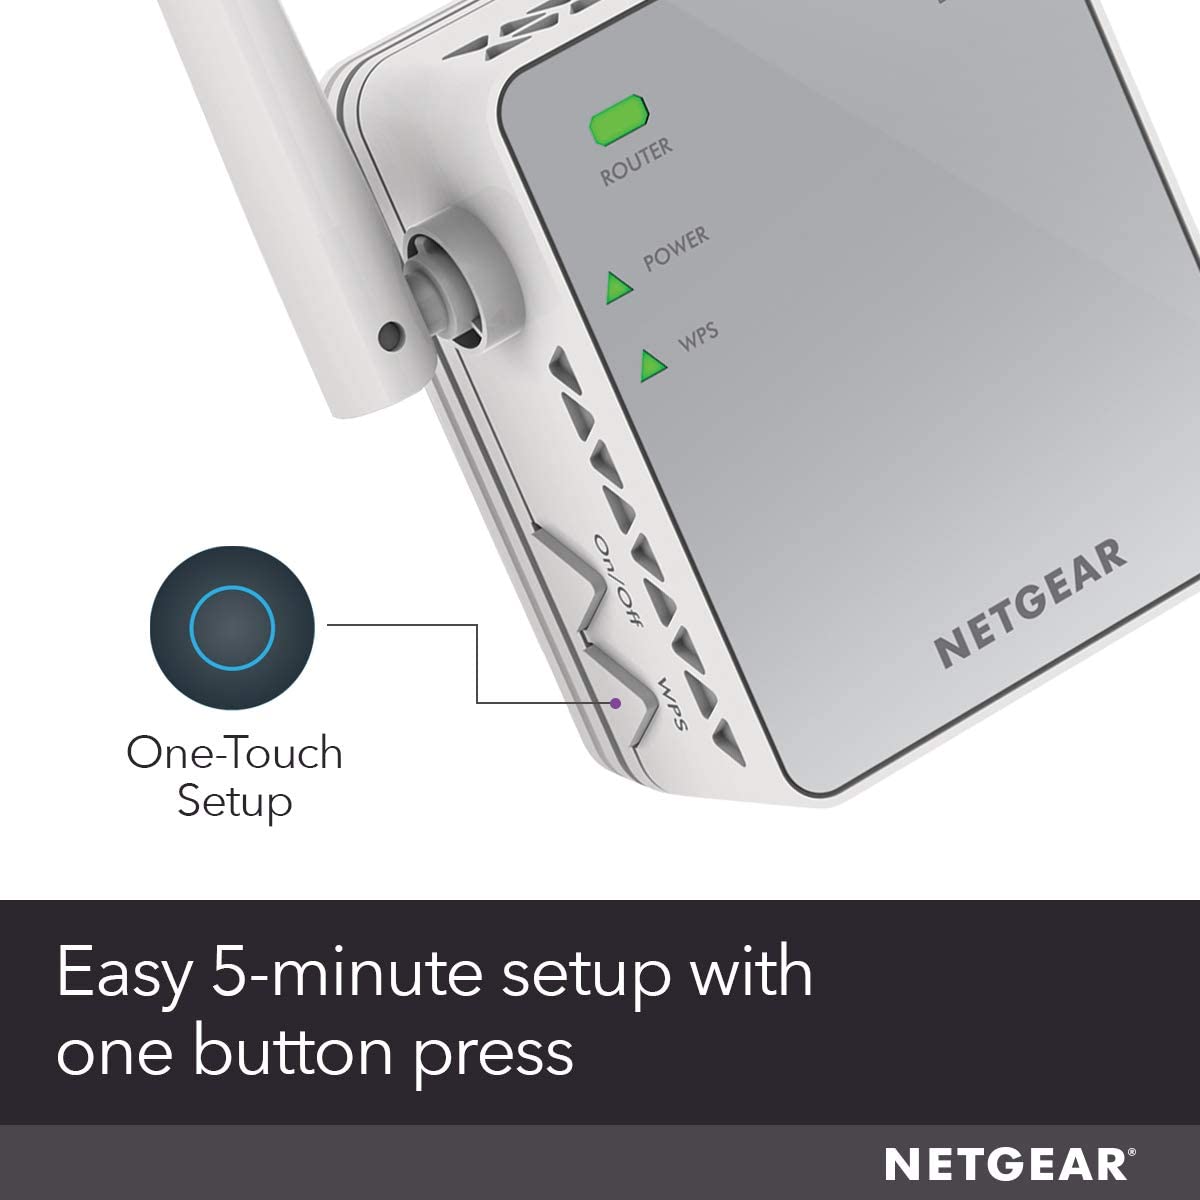 NETGEAR Wi-Fi Range Extender EX3700 – Coverage Up to 1000 Sq Ft and 15 Devices with AC750 Dual Band Wireless Signal Booster & Repeater (Up to 750Mbps Speed), and Compact Wall Plug Design